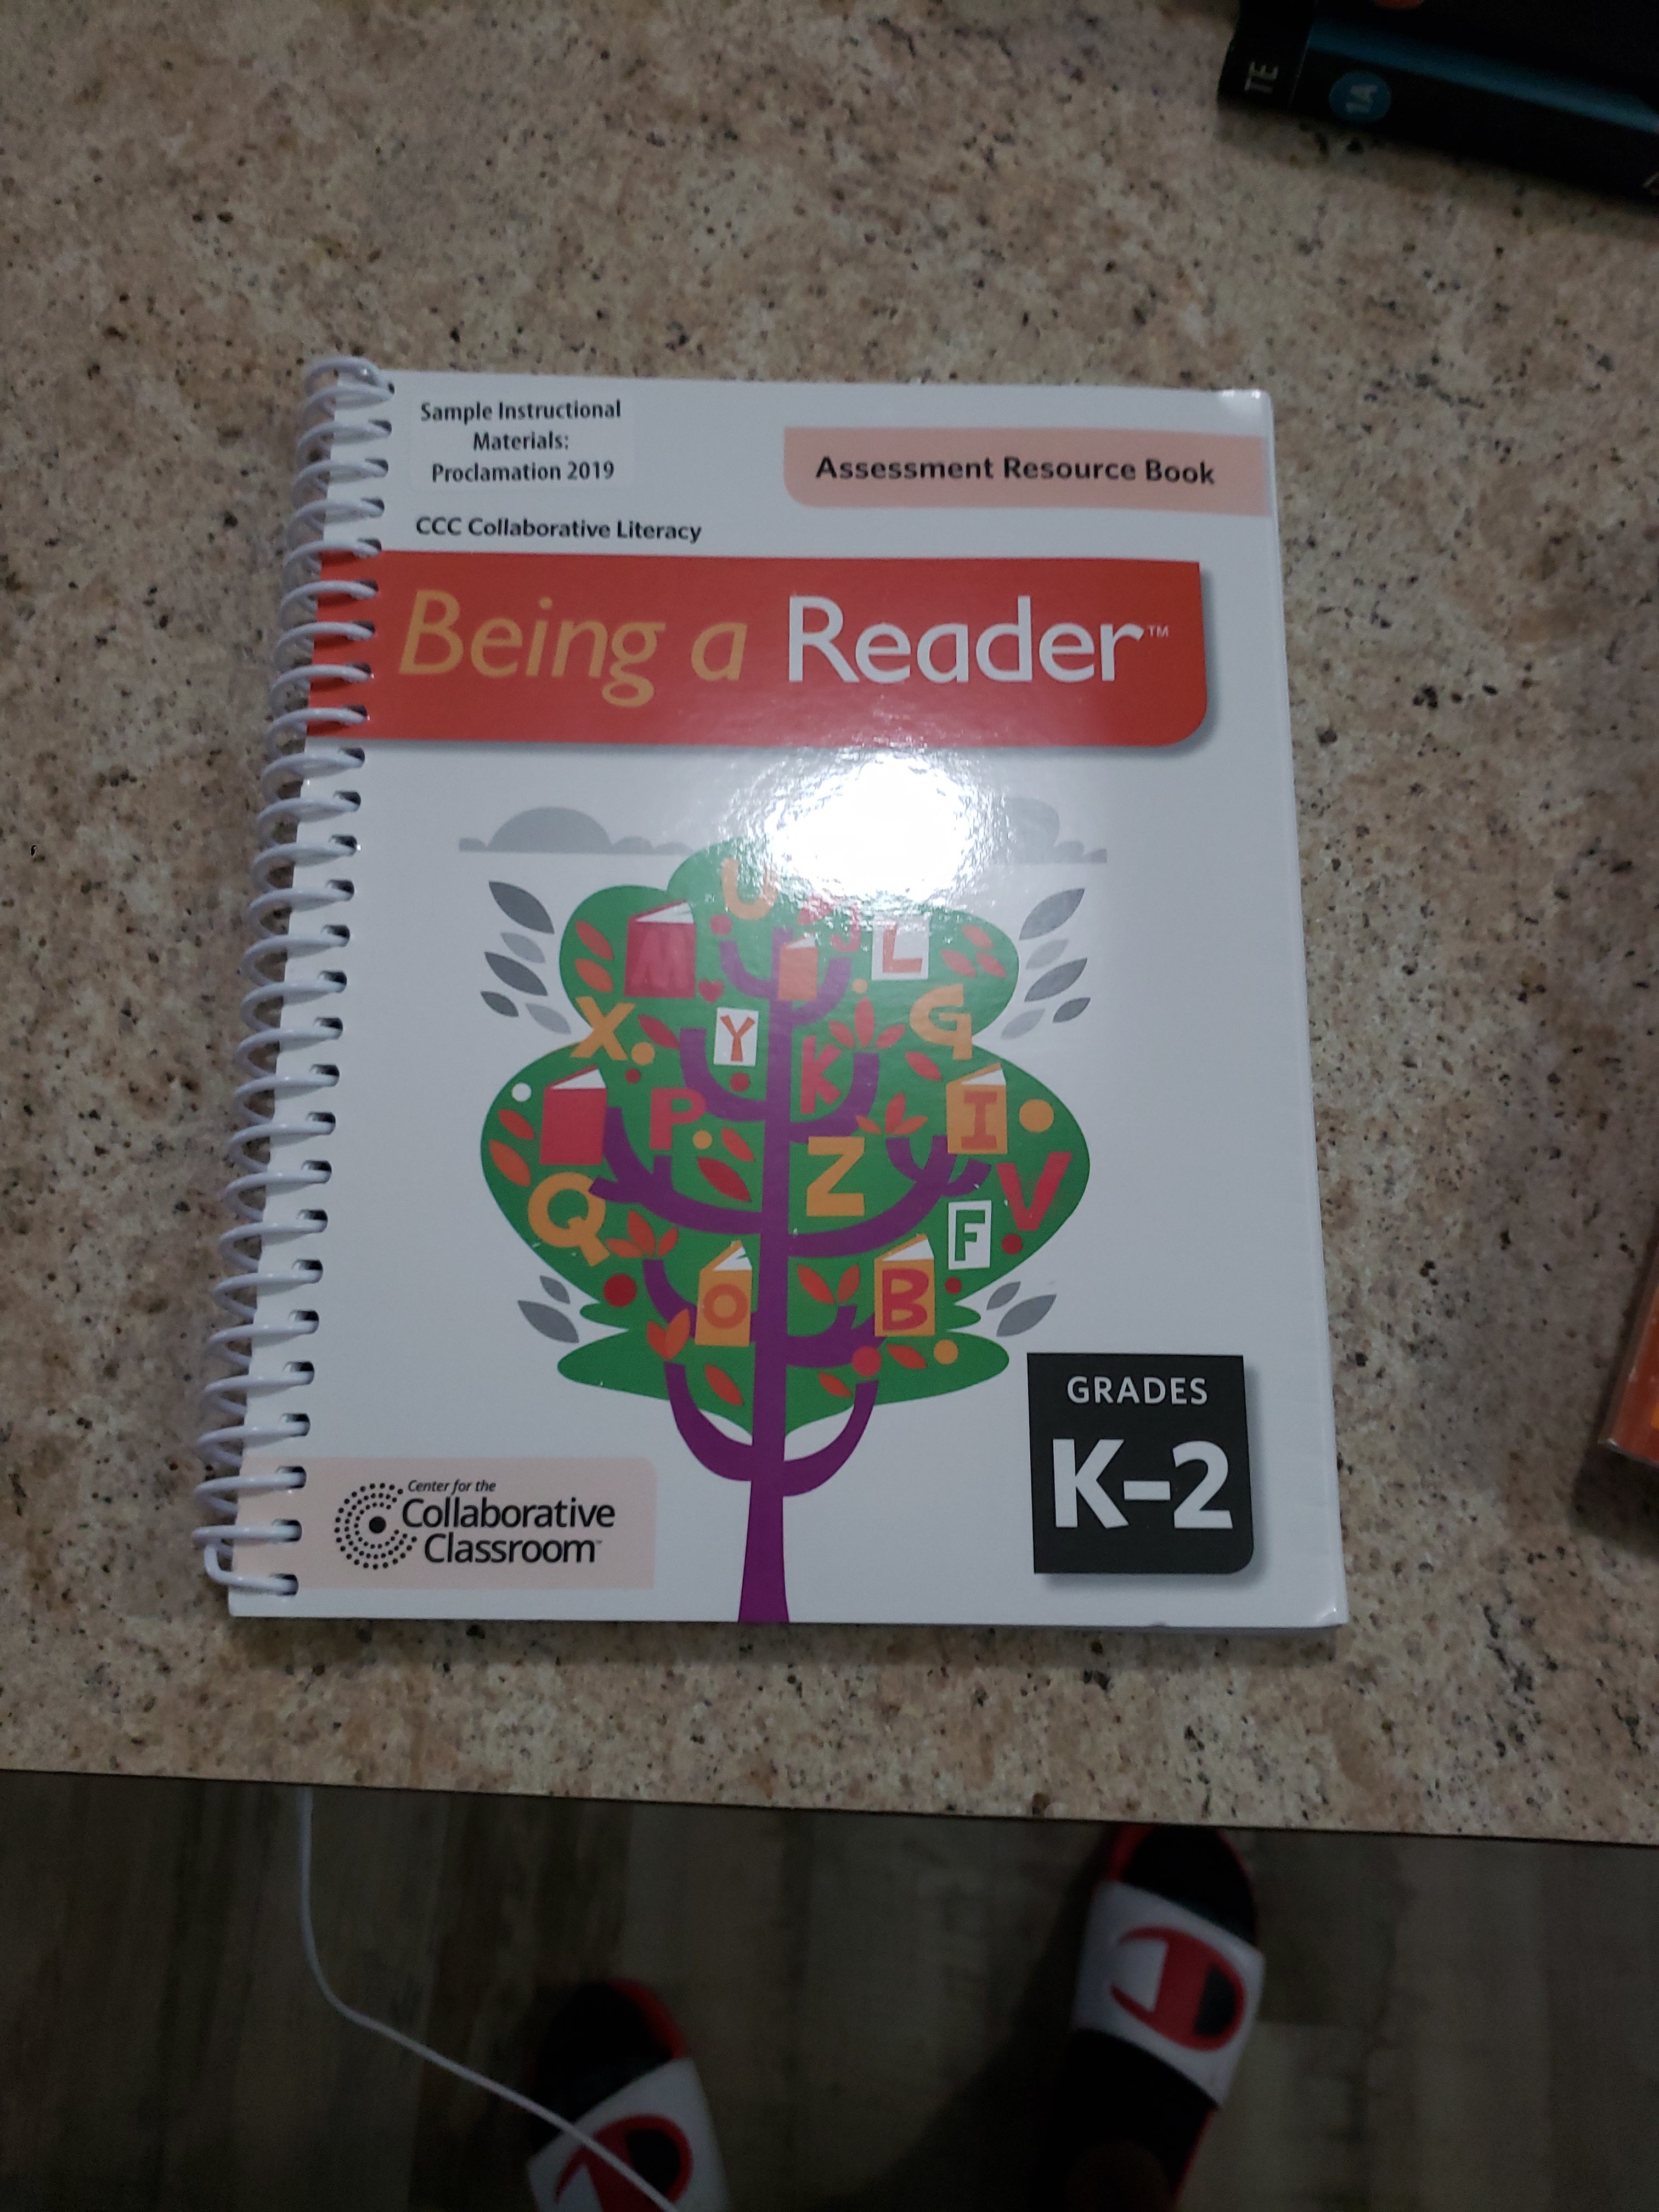 Classroom　for　Resource　Book,　Grades　Paperback　Collaborative　K-2　a　Assessment　the　Staff,　Pangobooks　by　Reader,　Being　Center